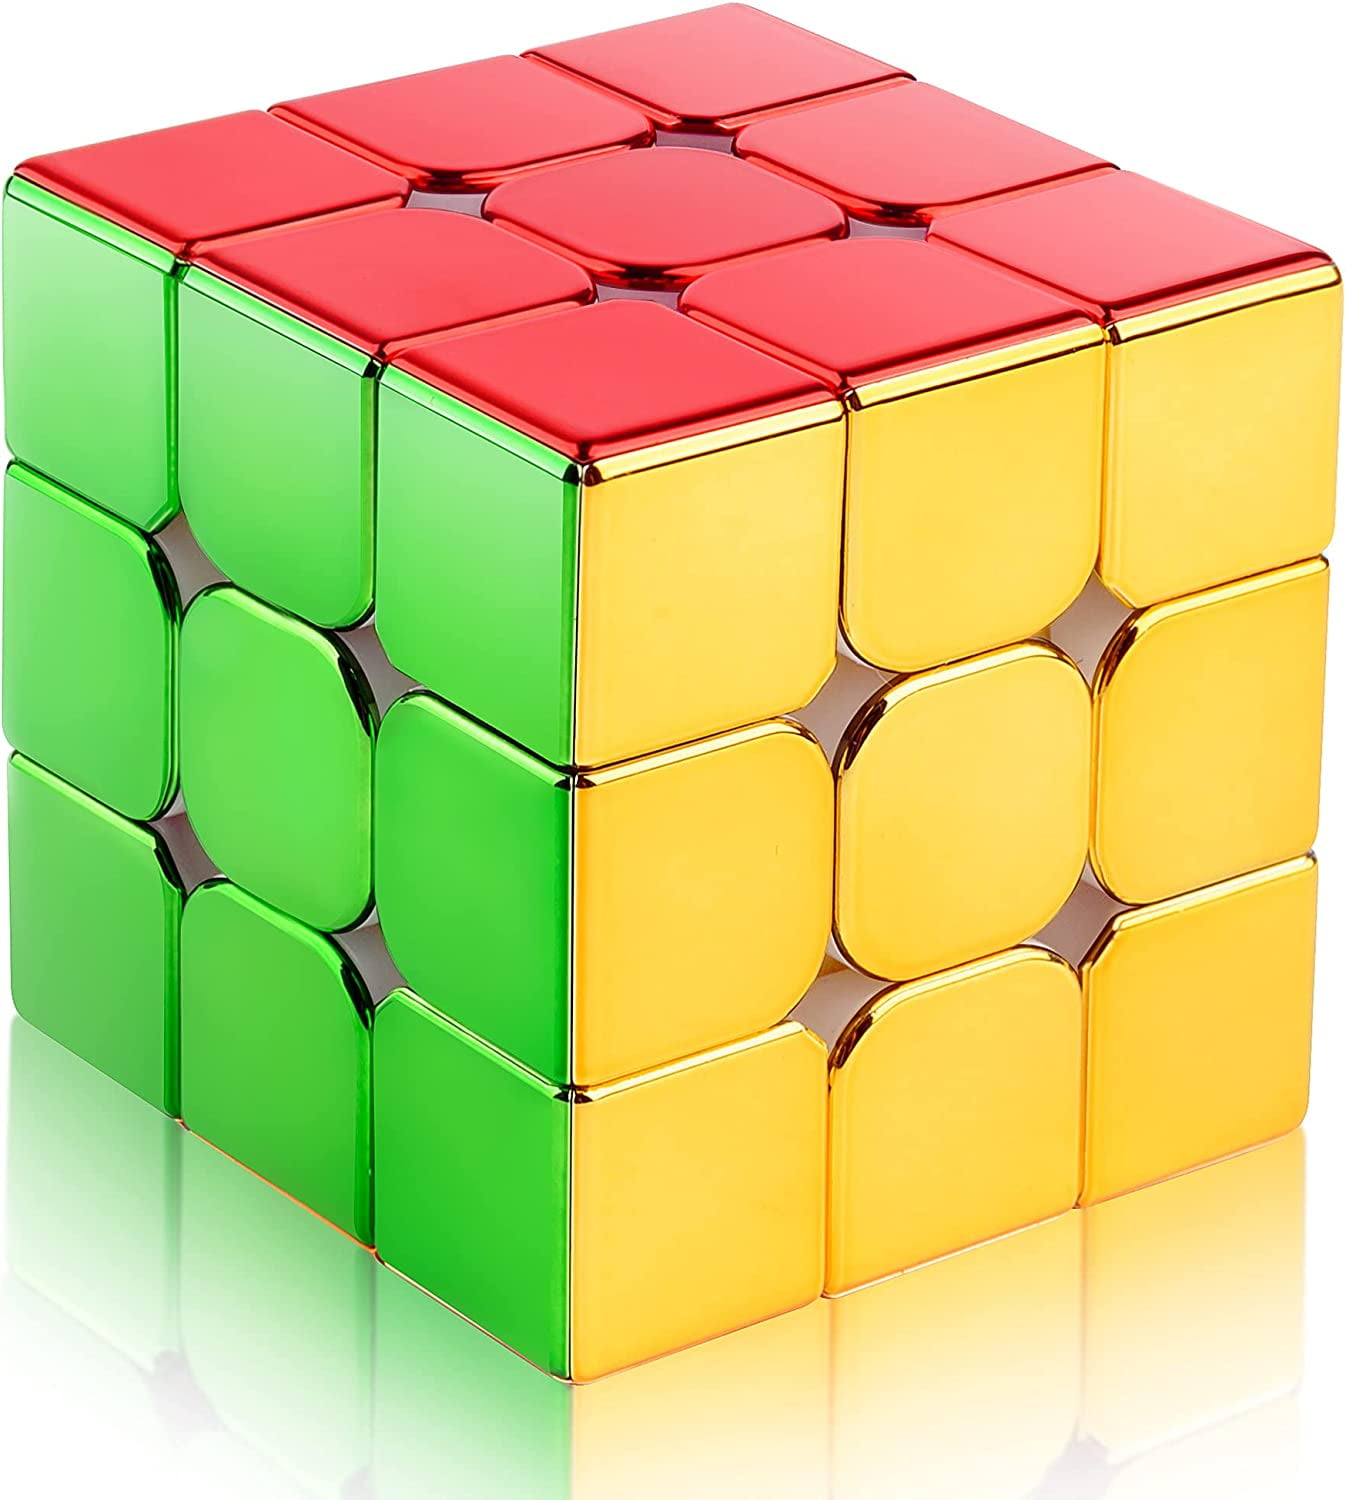 D-Fantix Cyclone Boys Original Magnetic Speed Cube 3x3x3, Mirror Reflective Stickerless Magic Cube, Personalized Shiny Puzzles for Kids Adults (56mm) - Walmart.com